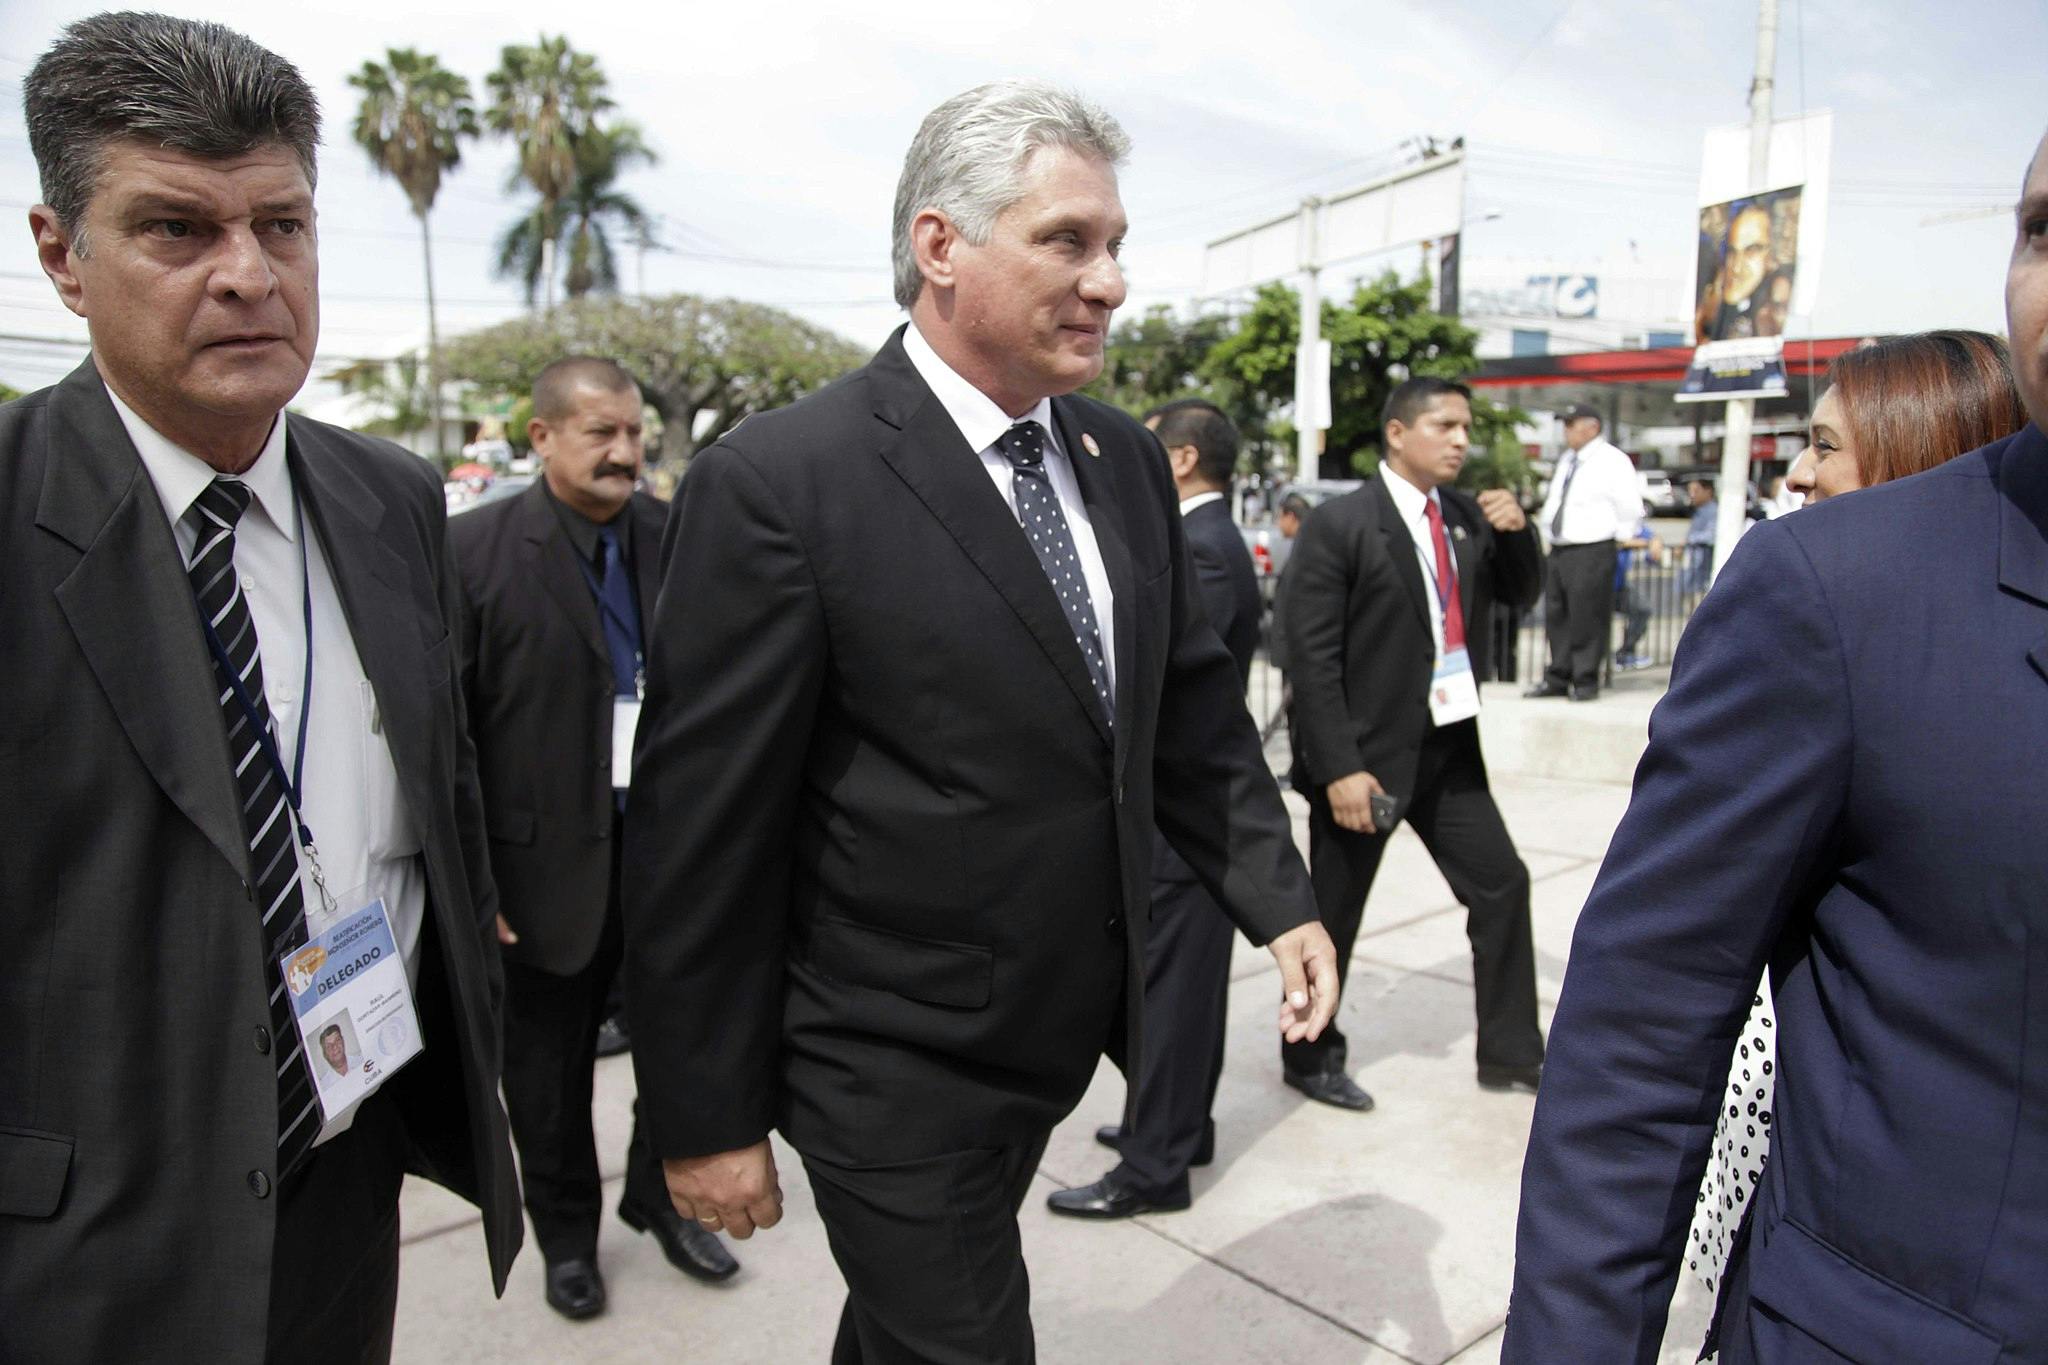 Who is Díaz-Canel, the next president of Cuba?